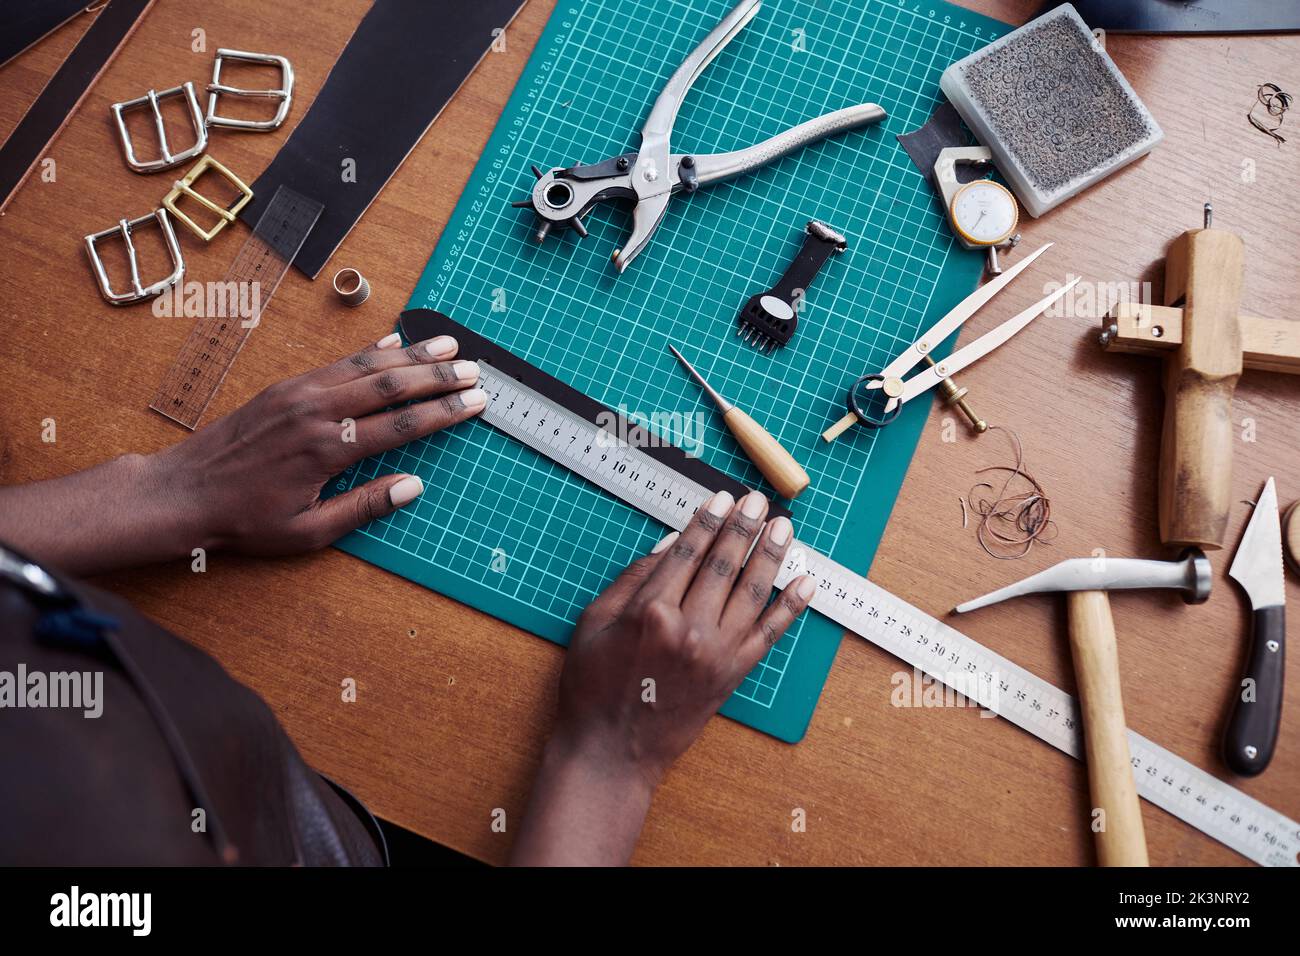 Leather craft tools on cutting mat Stock Photo - Alamy